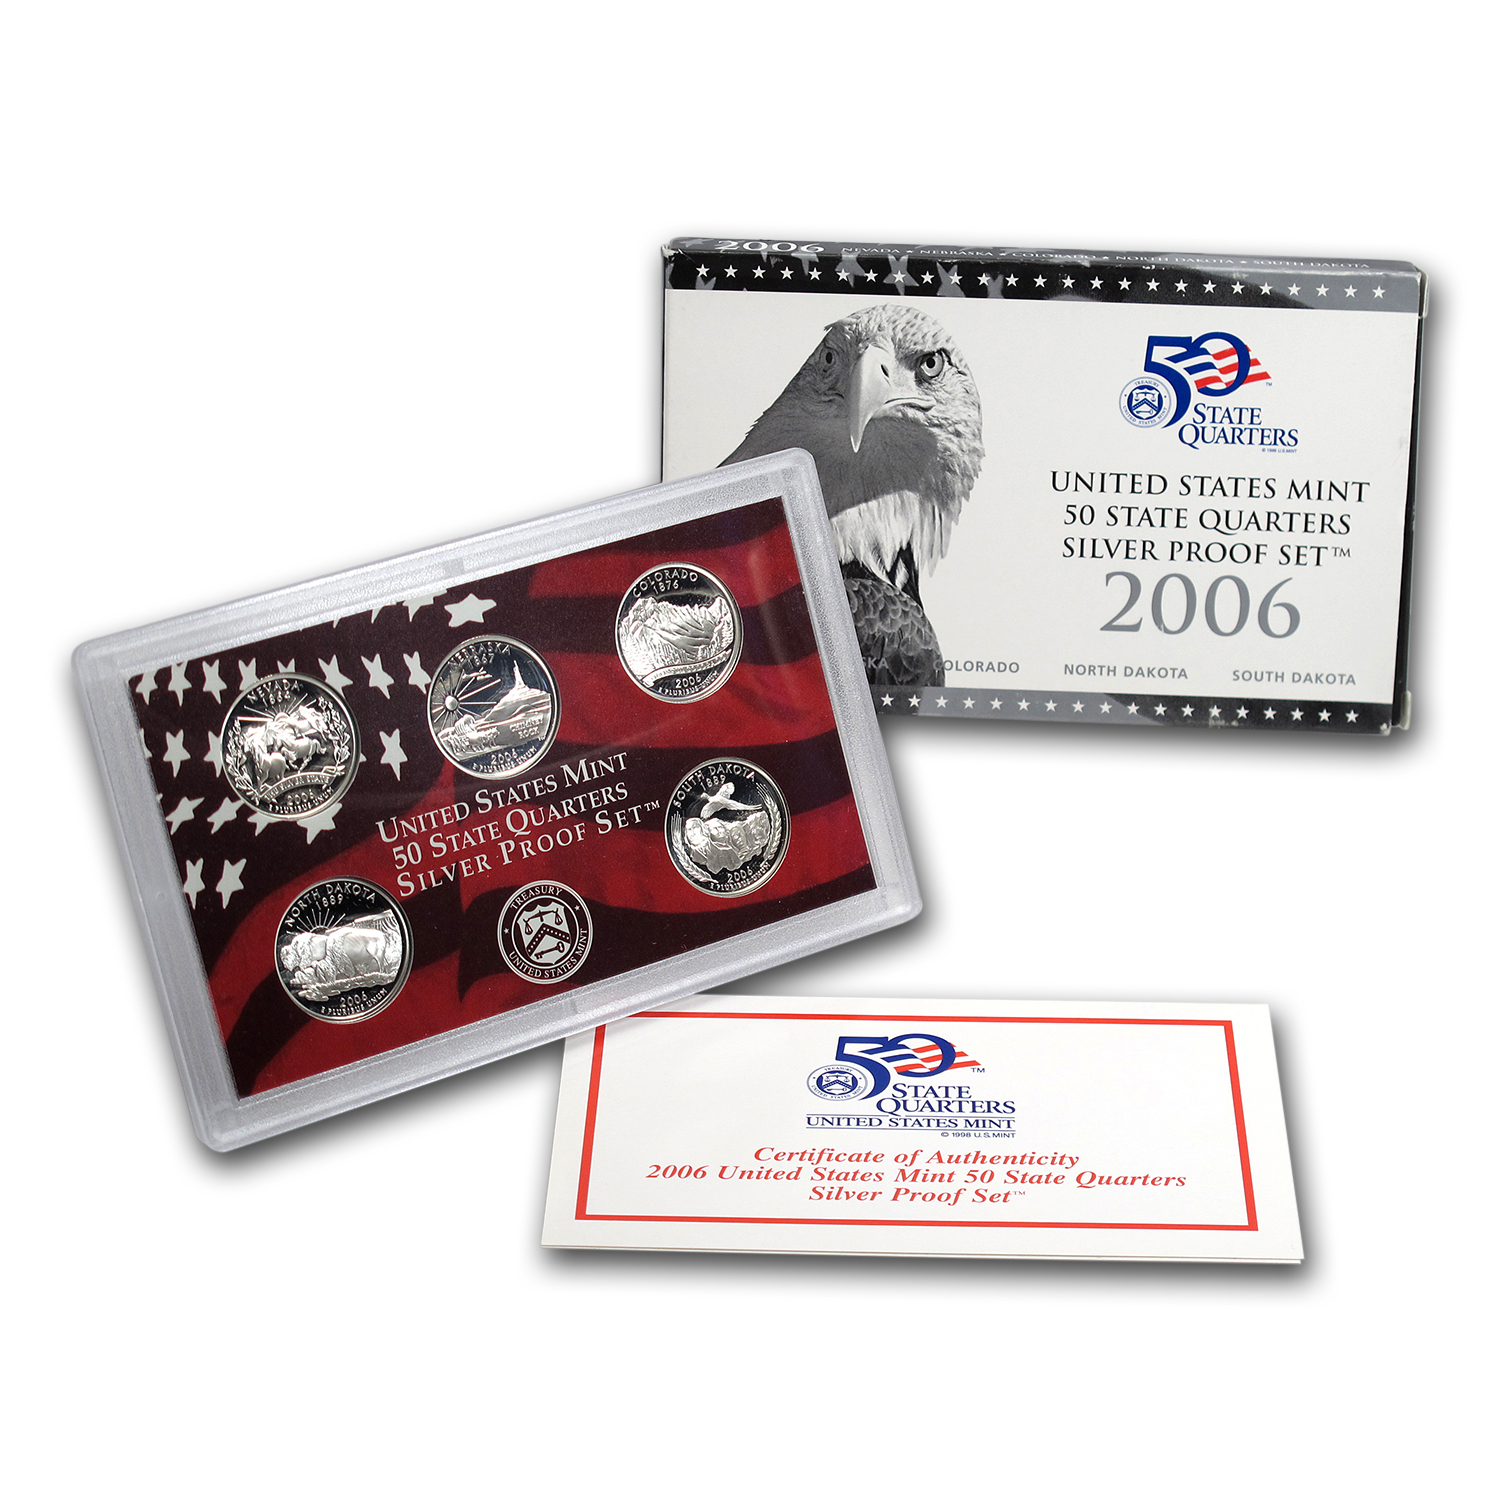 Buy 2006 50 State Quarters Proof Set (Silver)